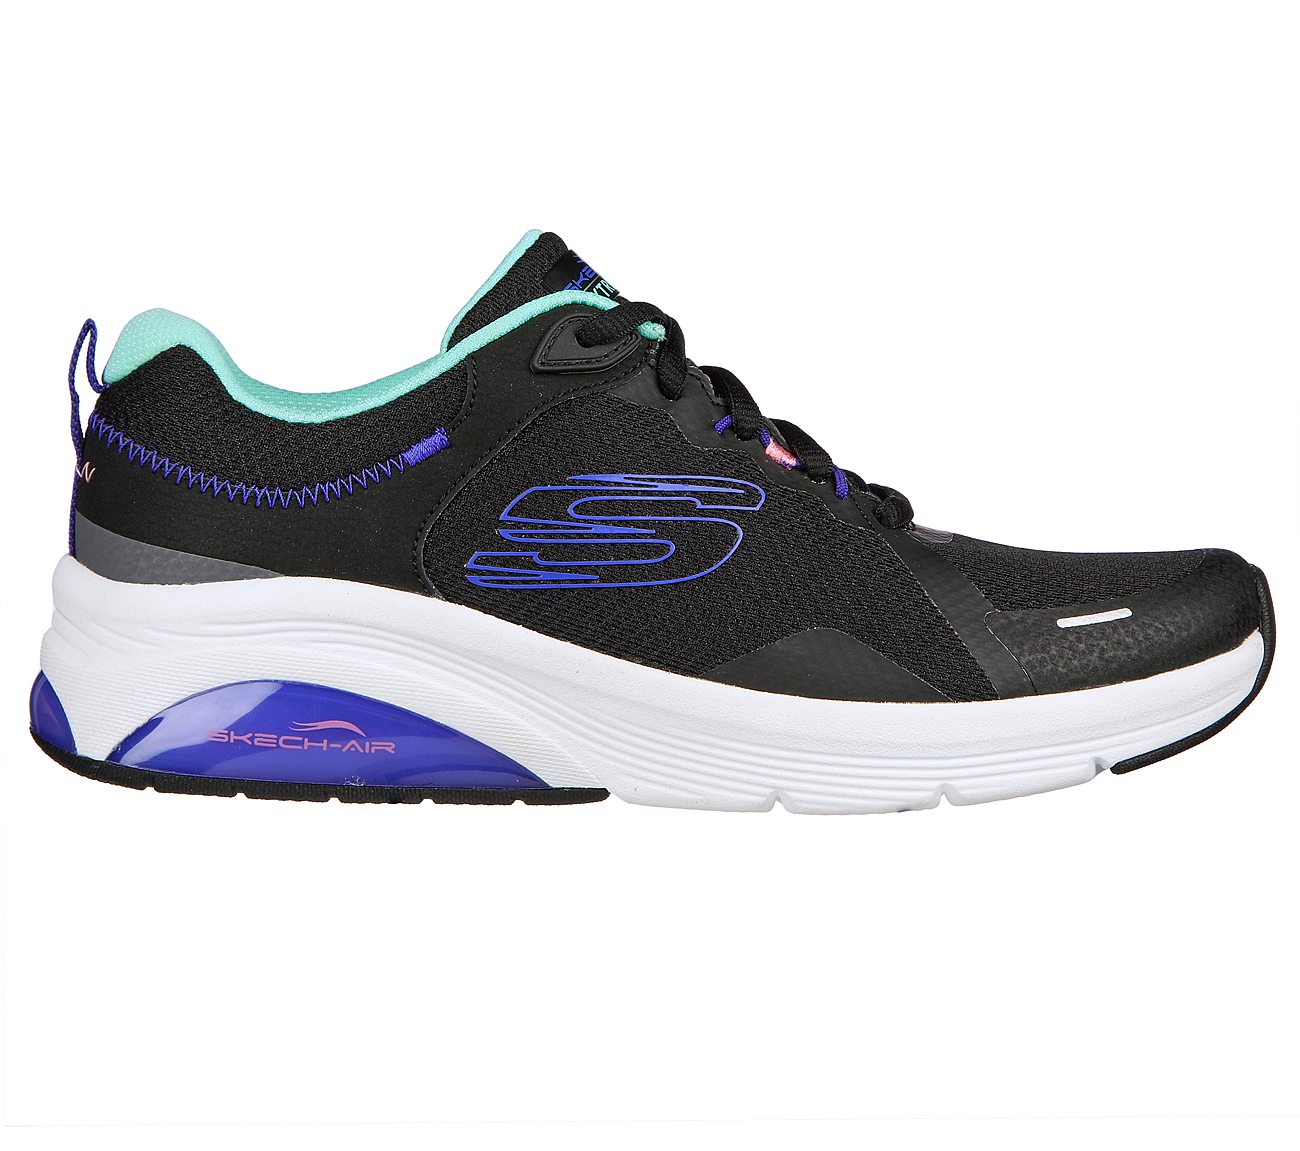 SKECH-AIR EXTREME 2.0-NEW REM, BLACK/MULTI Footwear Lateral View